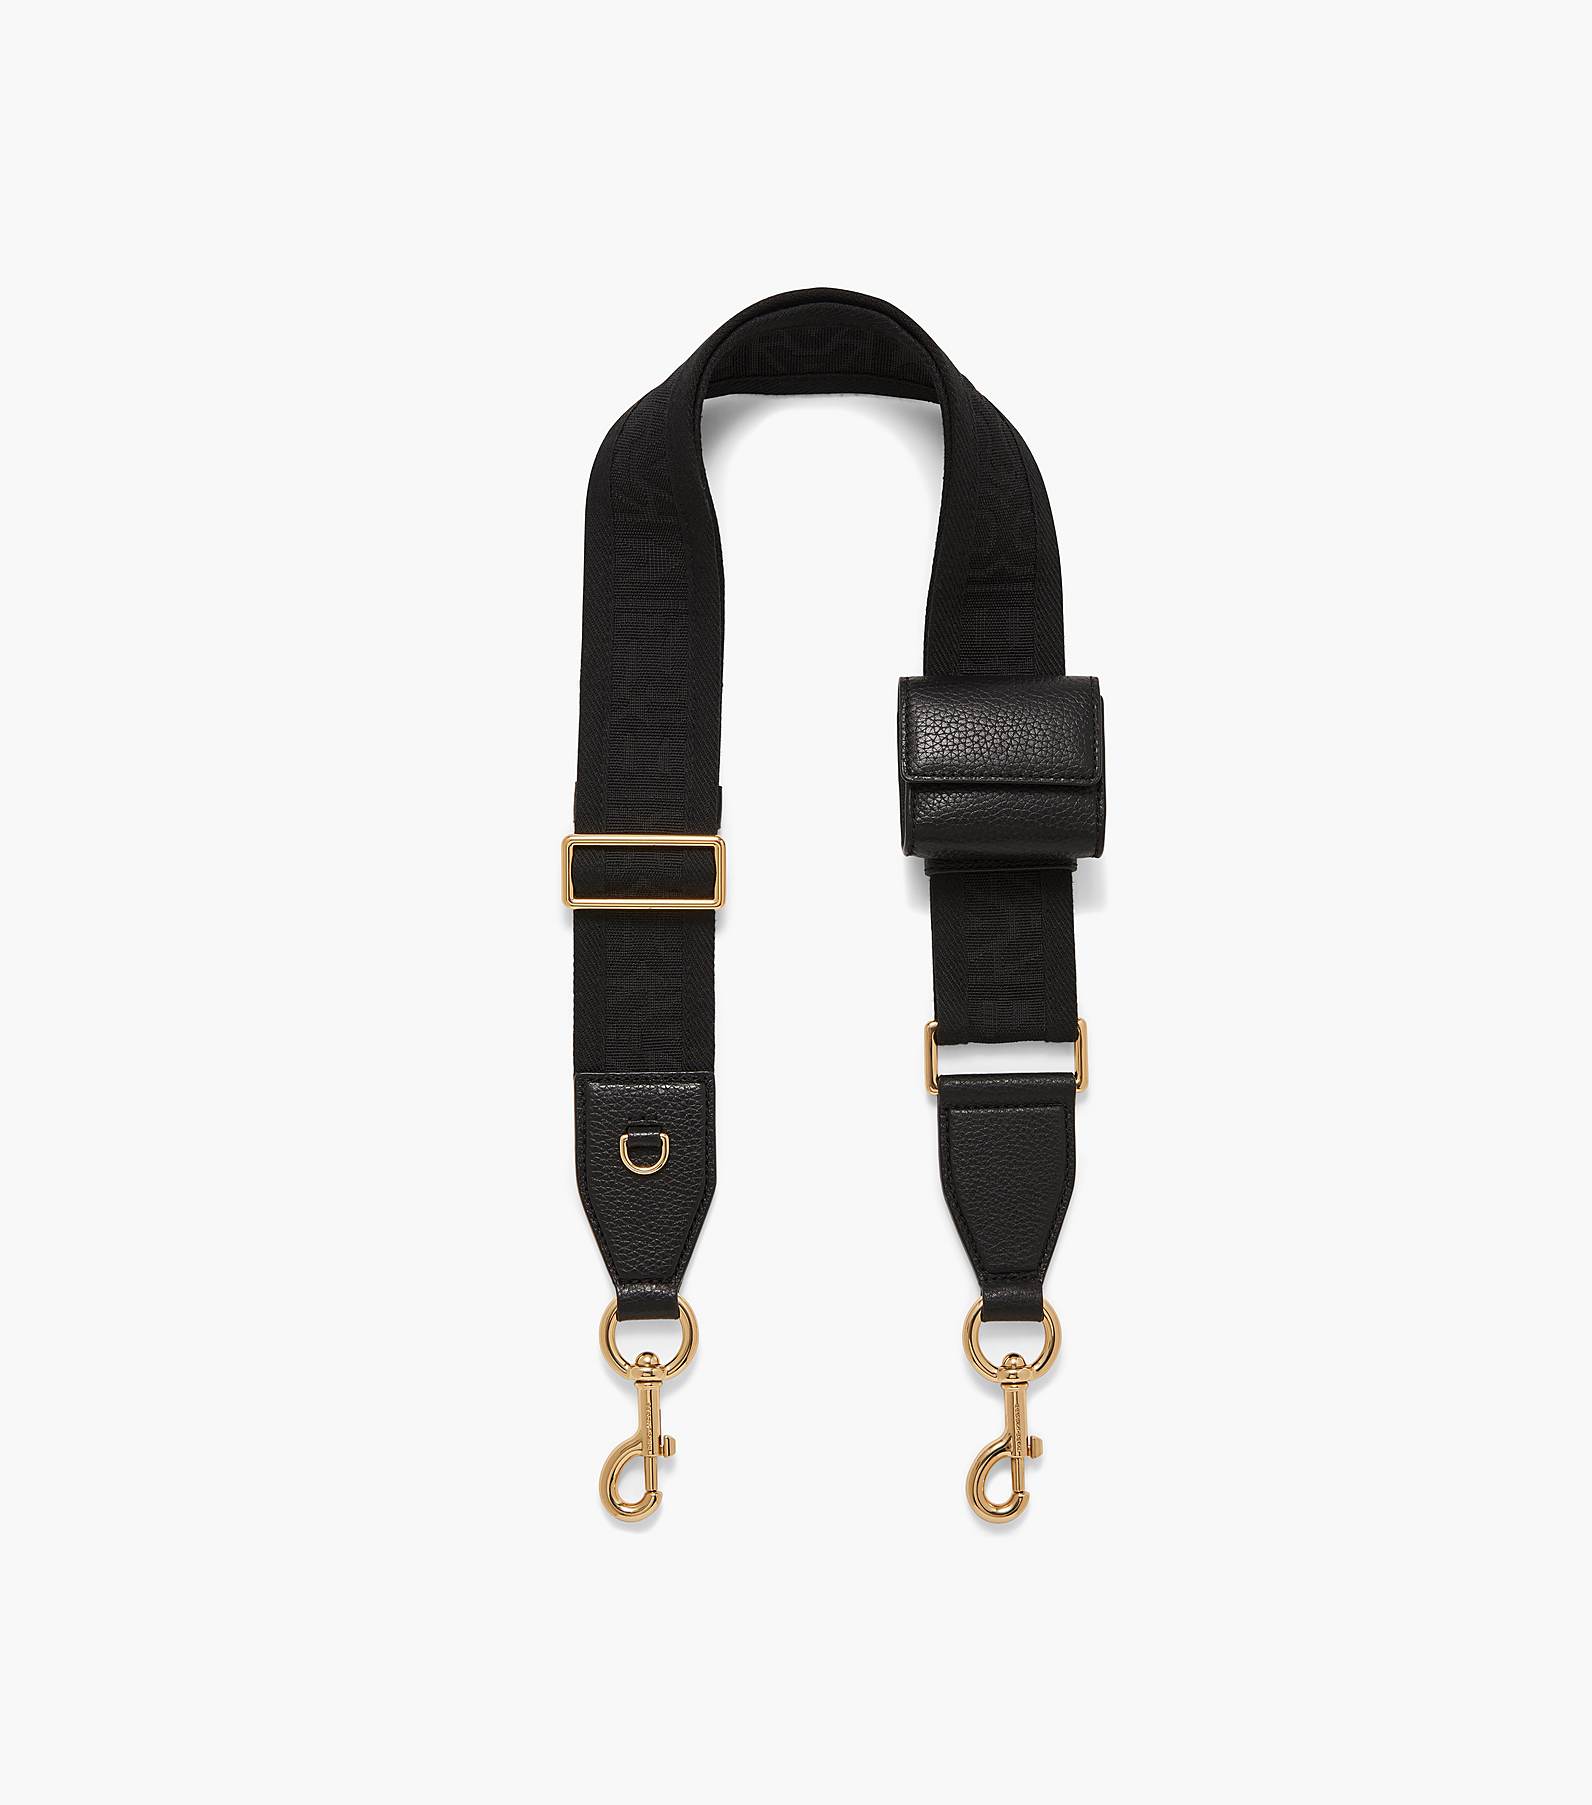 THE LEATHER CARGO WEBBING STRAP